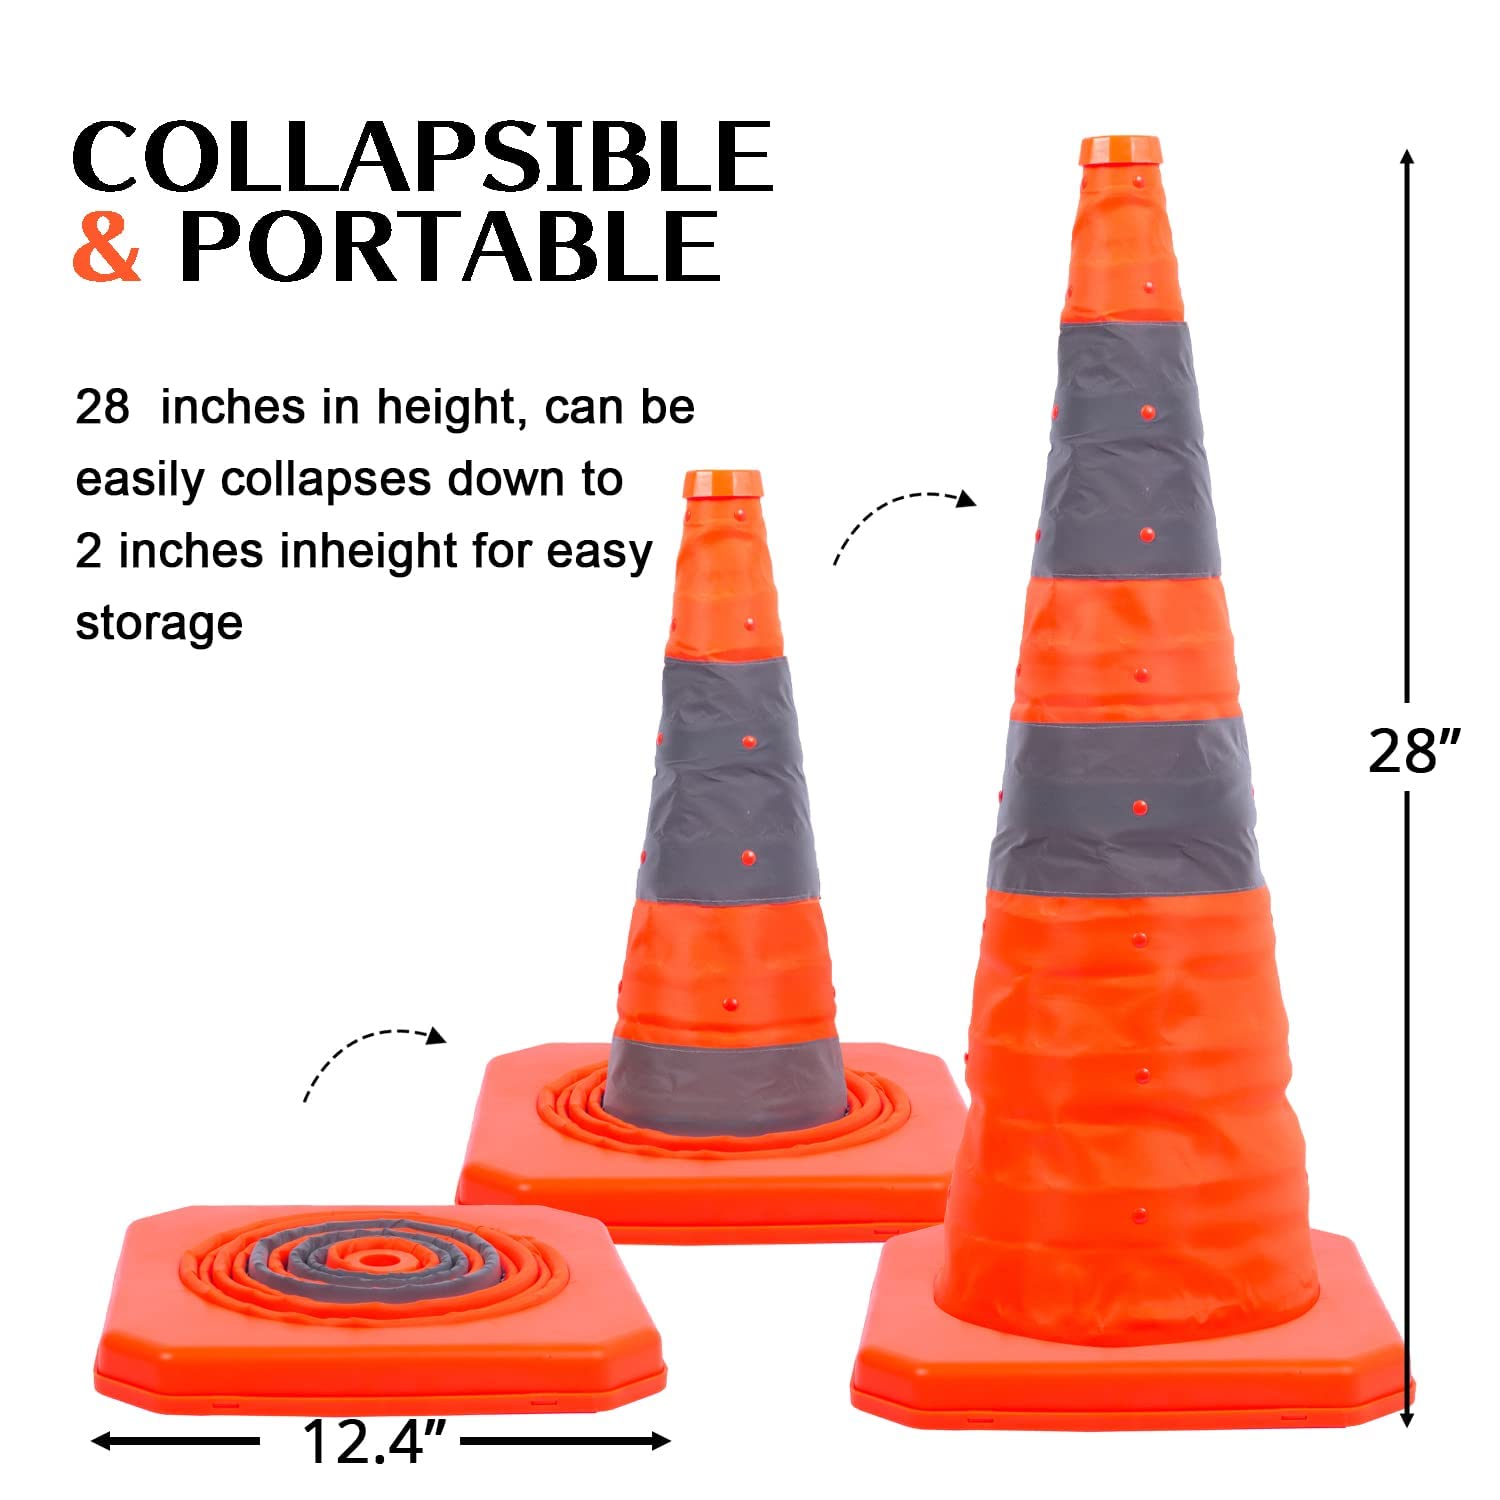 4 Pack 28 inch Collapsible Traffic Cones with LED Light, Safety Cones with Reflective Collars, Multi Purpose Pop Up Extendable Road Safety Cone by GUARDLEAD